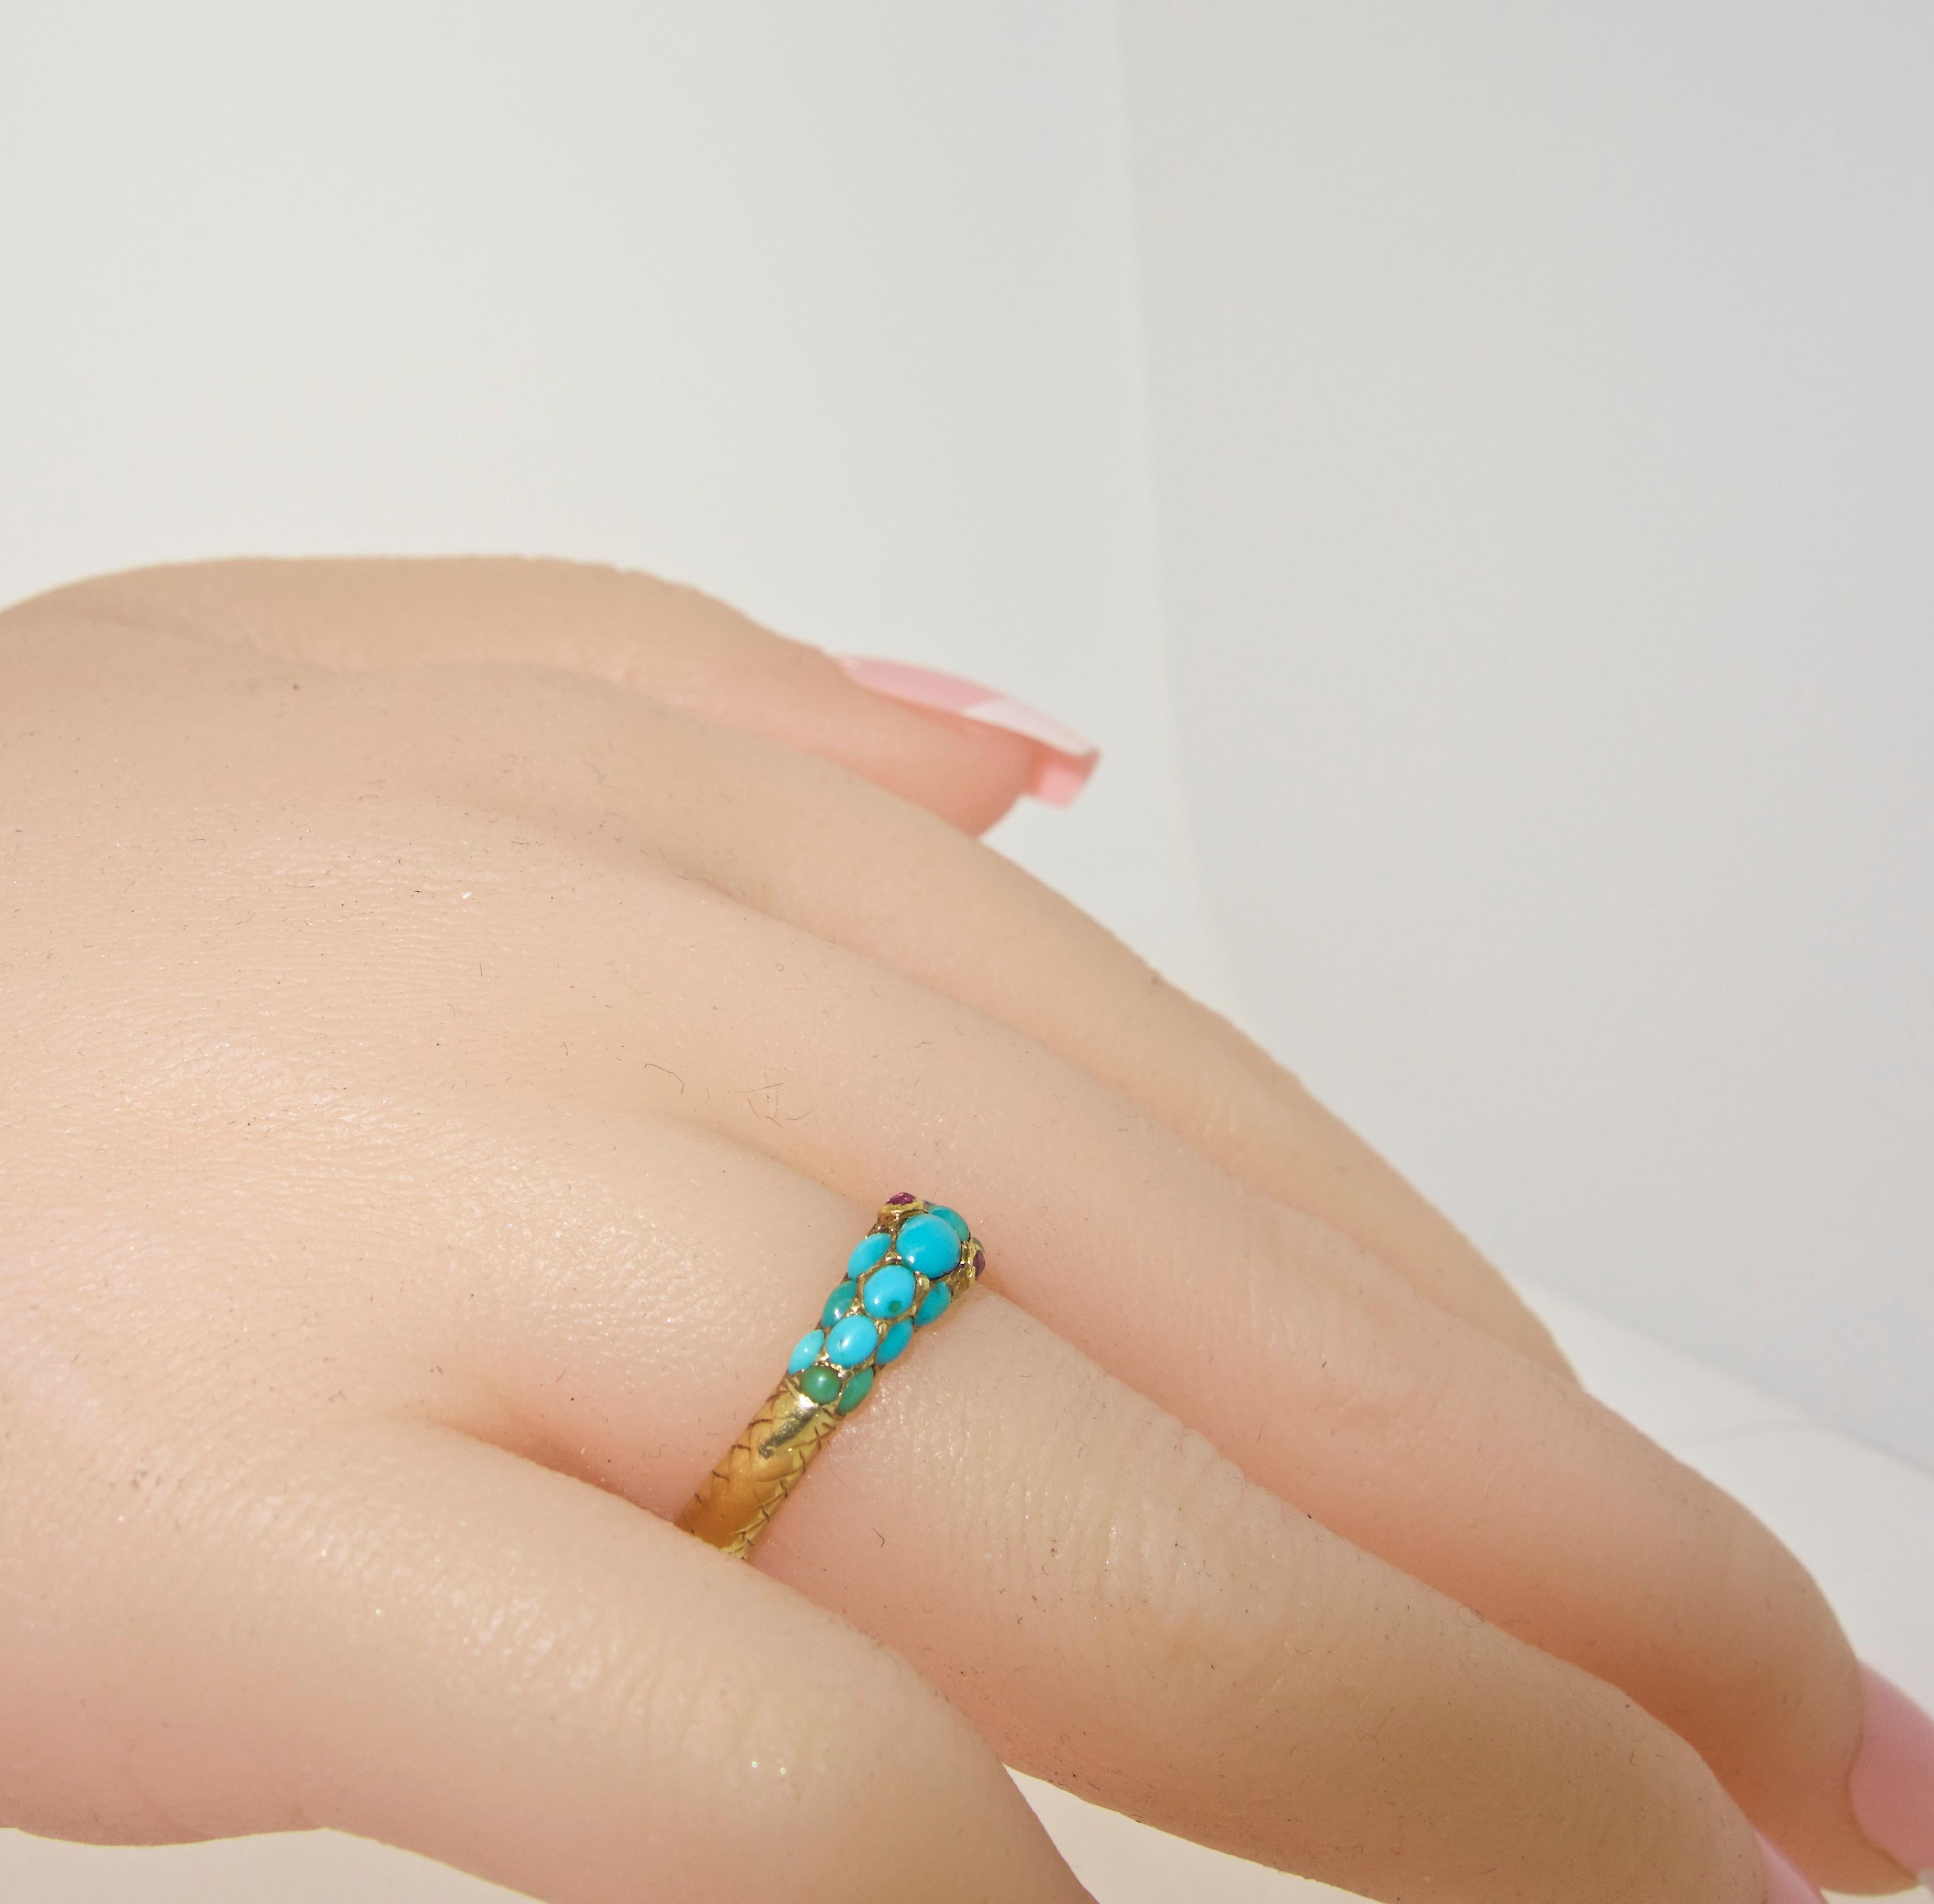 Women's or Men's Victorian Turquoise Serpent Ring, circa 1870